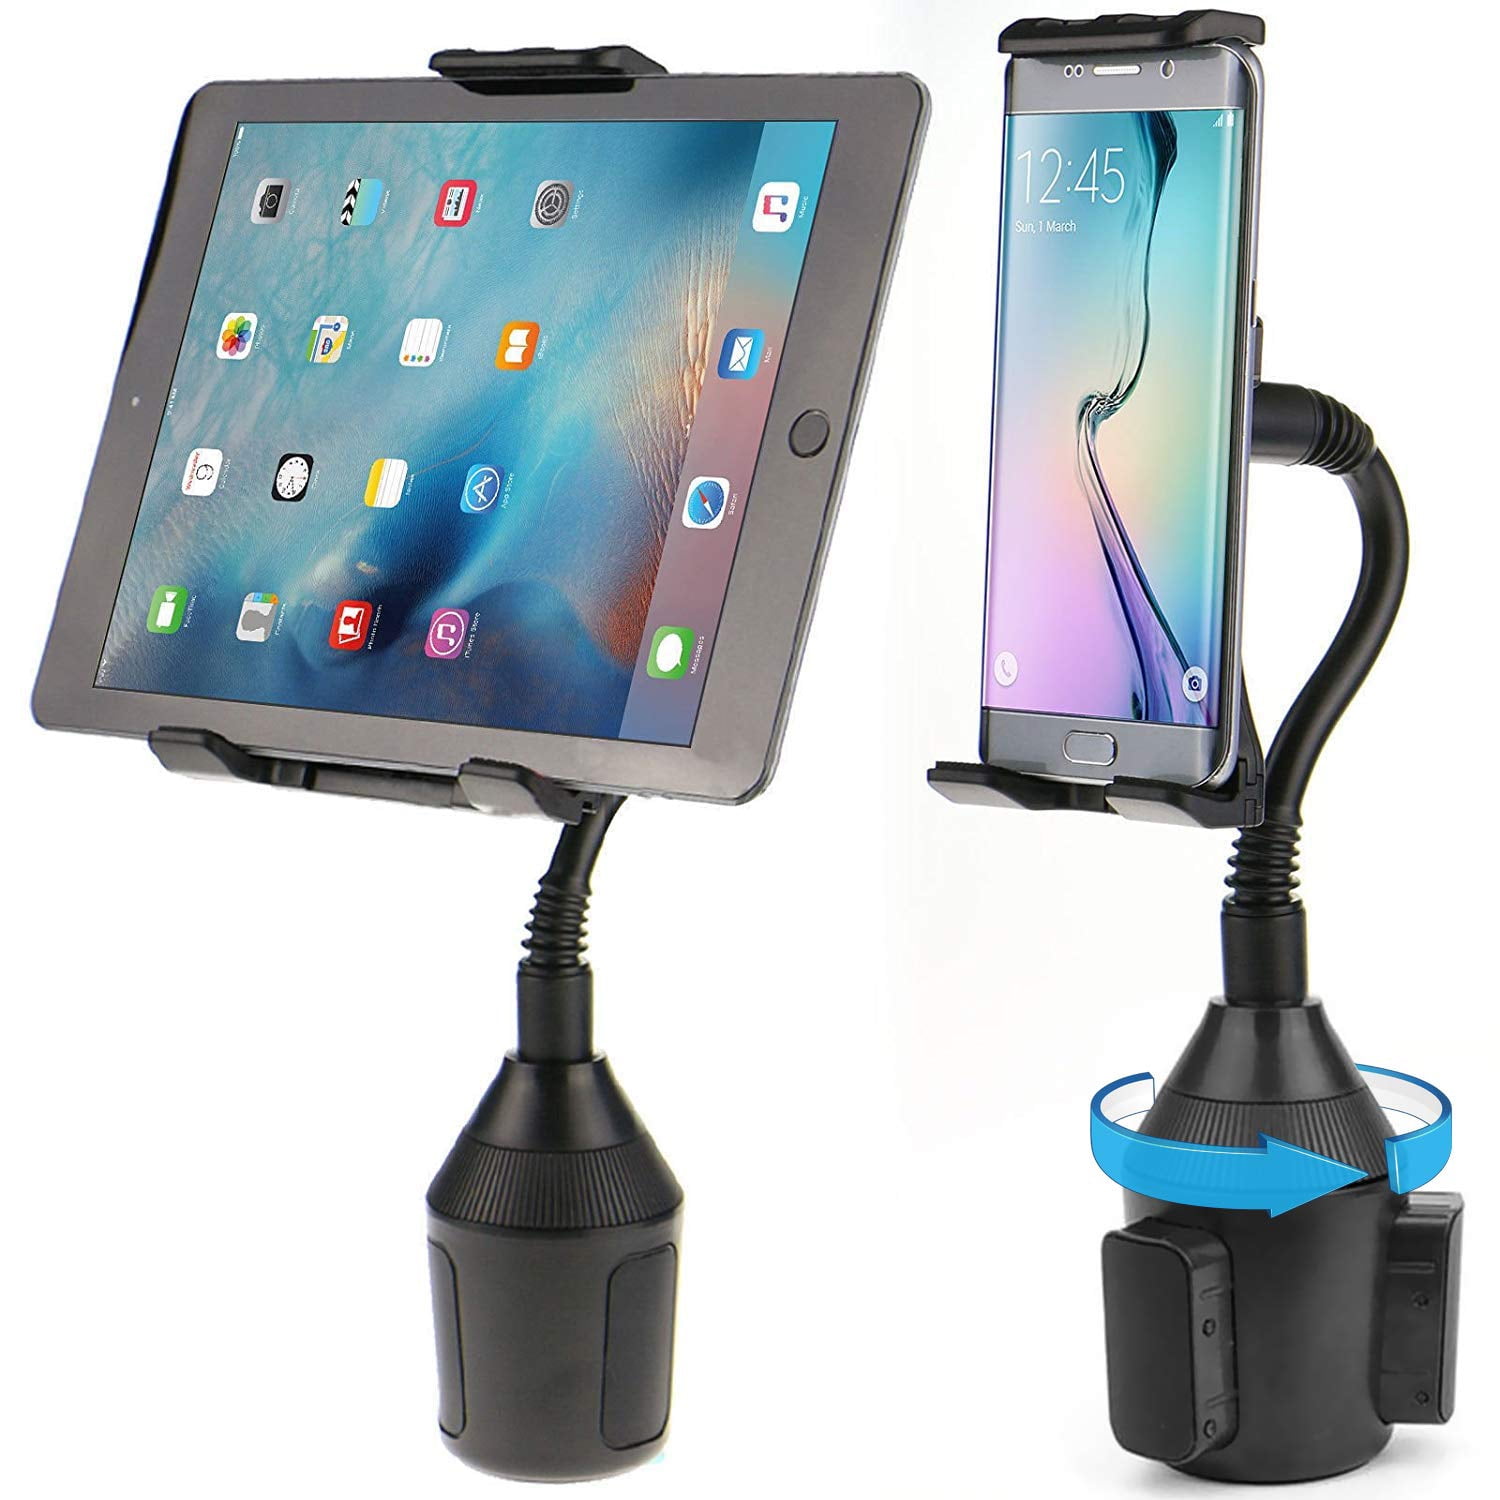 woleyi Car Cupholder Tablet & Phone Holder with Adjustable Arm for iPad Pro 9.7 iPhone Cup Holder Car Tablet Mount Samsung Galaxy Tabs 11 12.9 Air Mini 5 4 3 2 More 4-13 Cell Phones and Tablets 